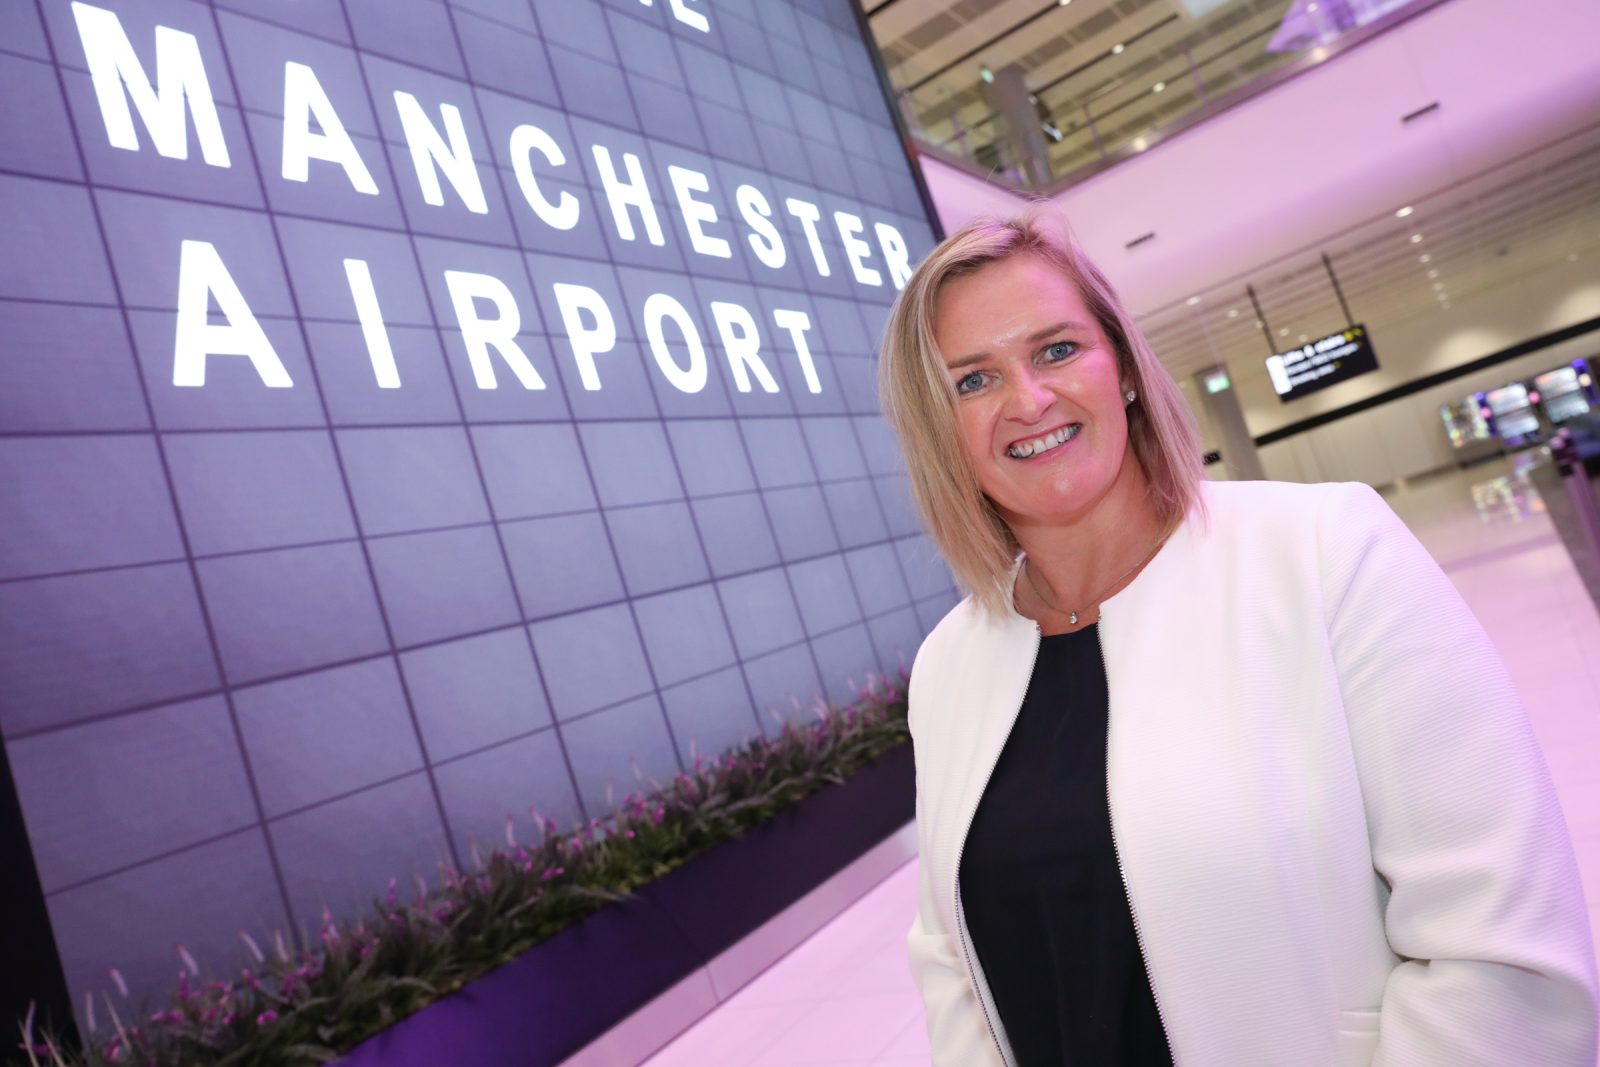 Manchester Airport boss steps down amid another week of travel chaos, The Manc